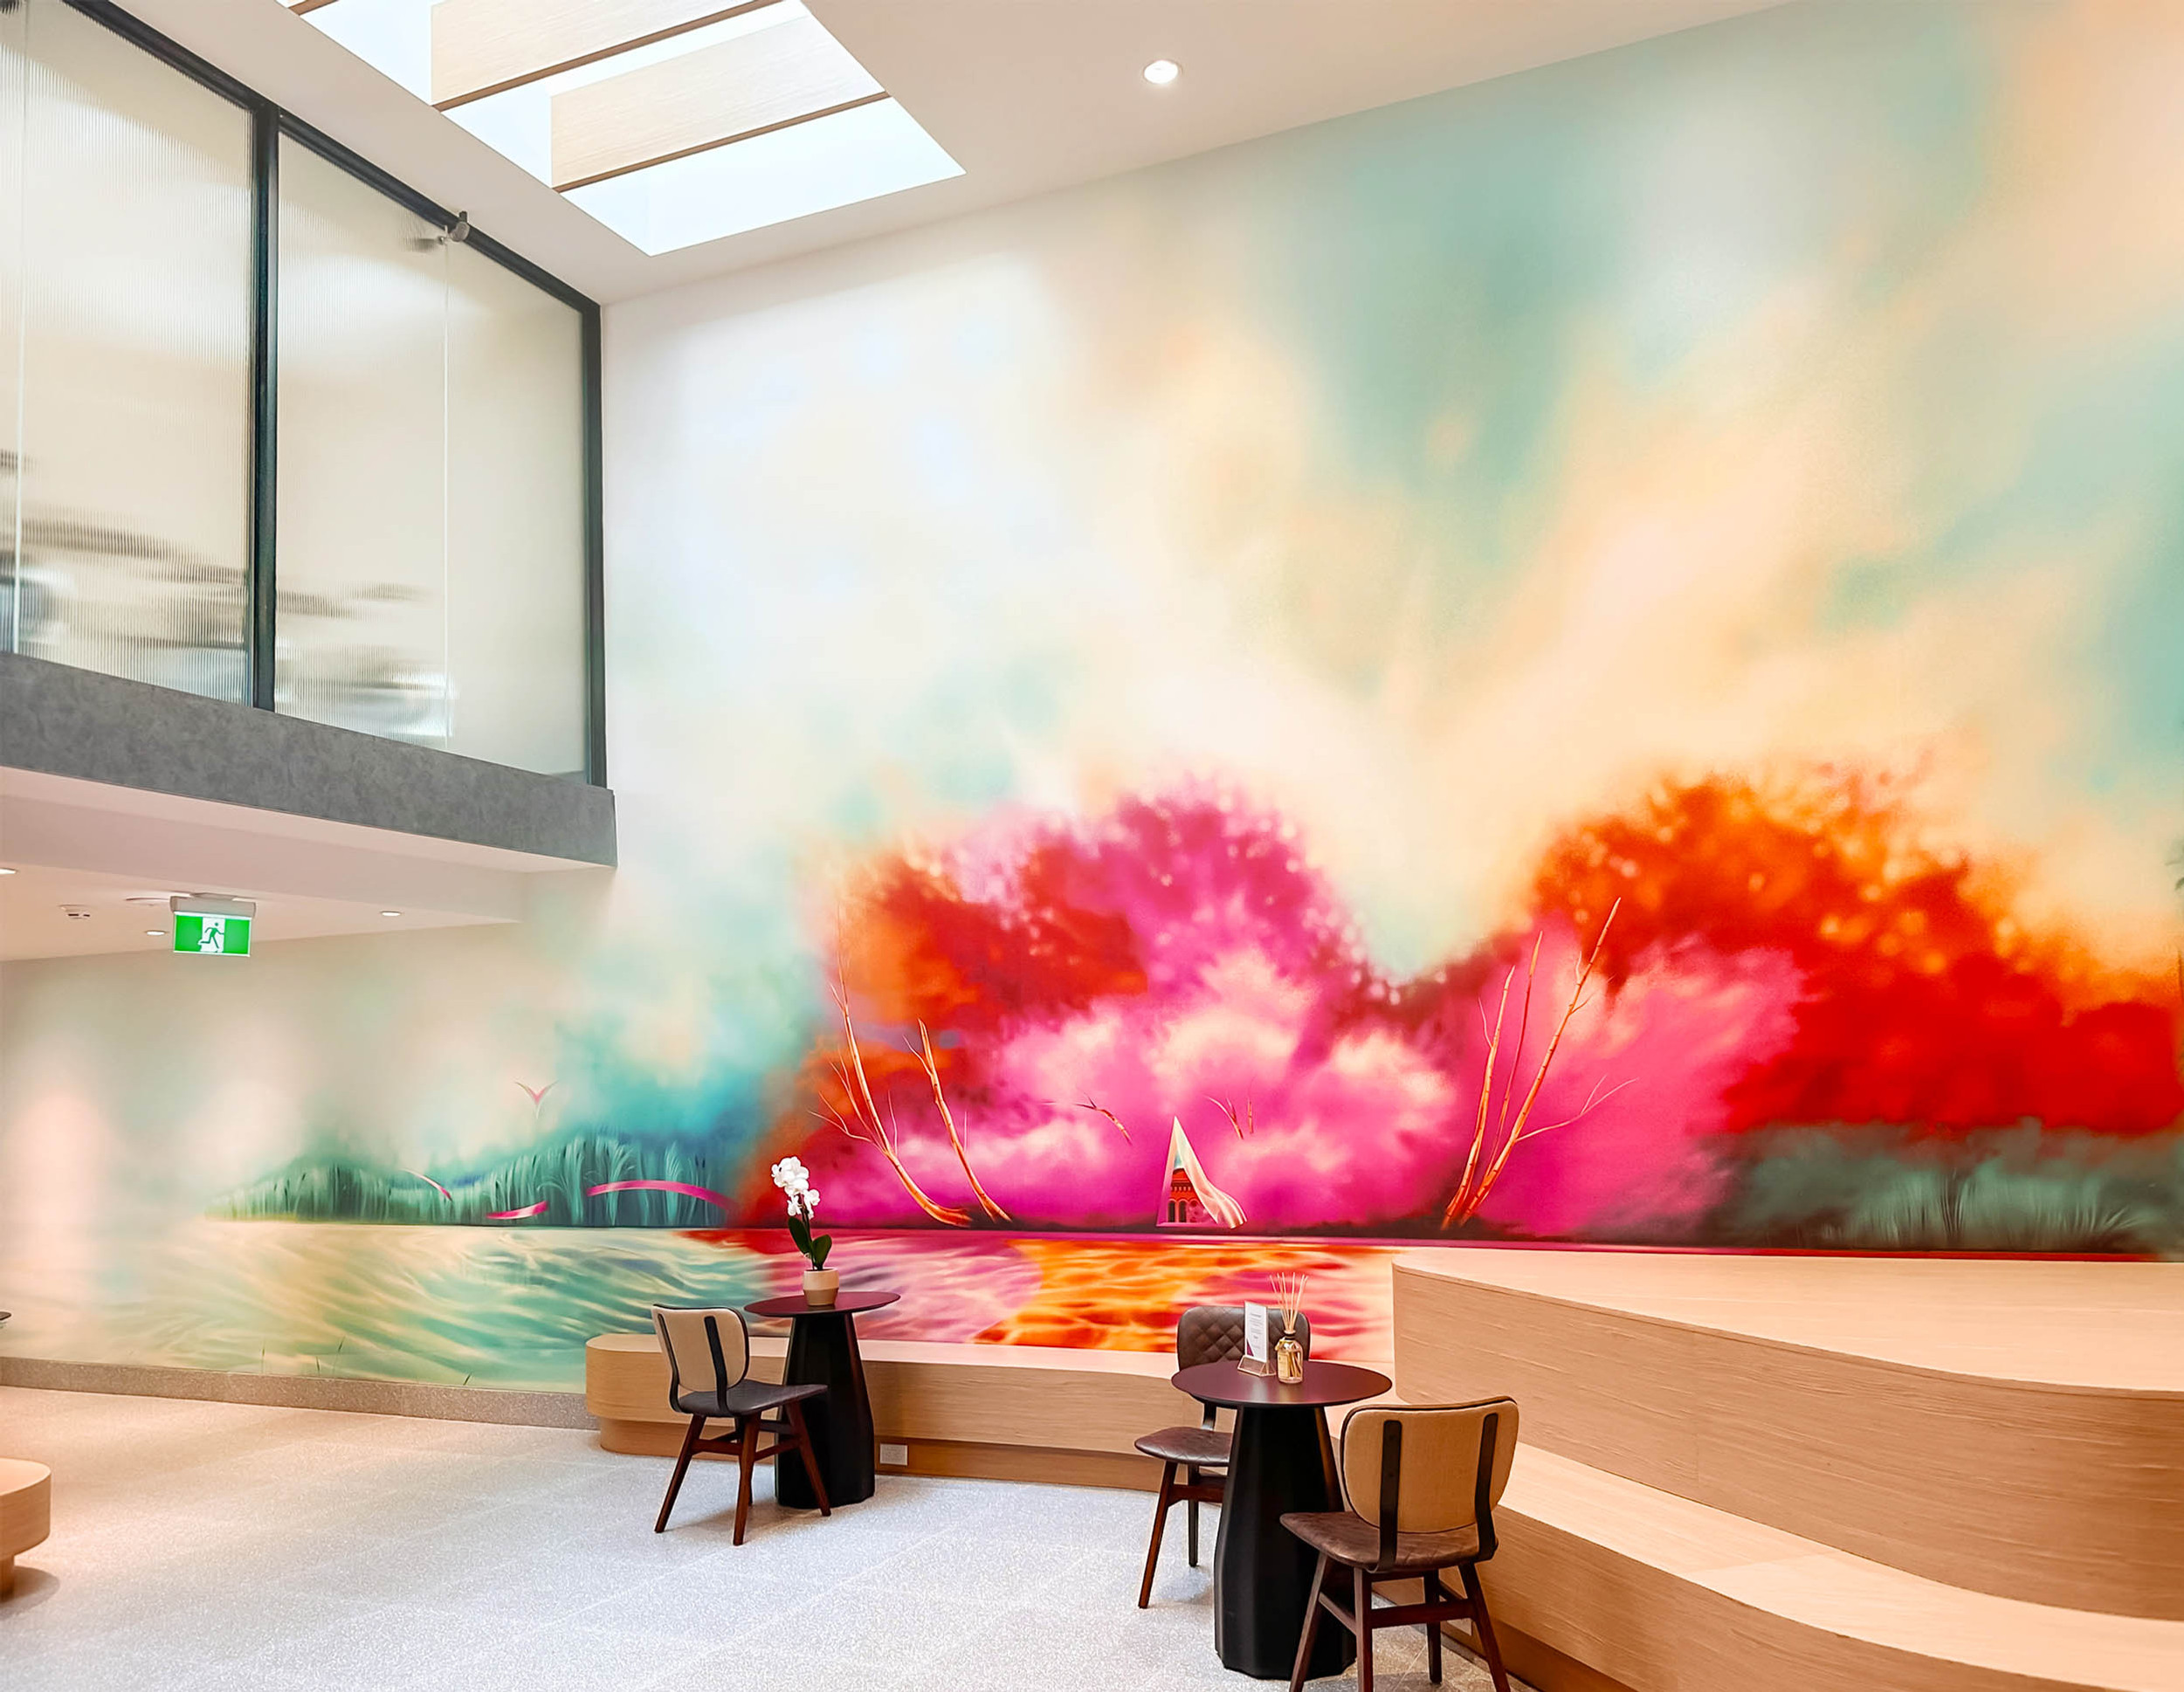 A colorful and scenic artwork mural displayed in a lobby.